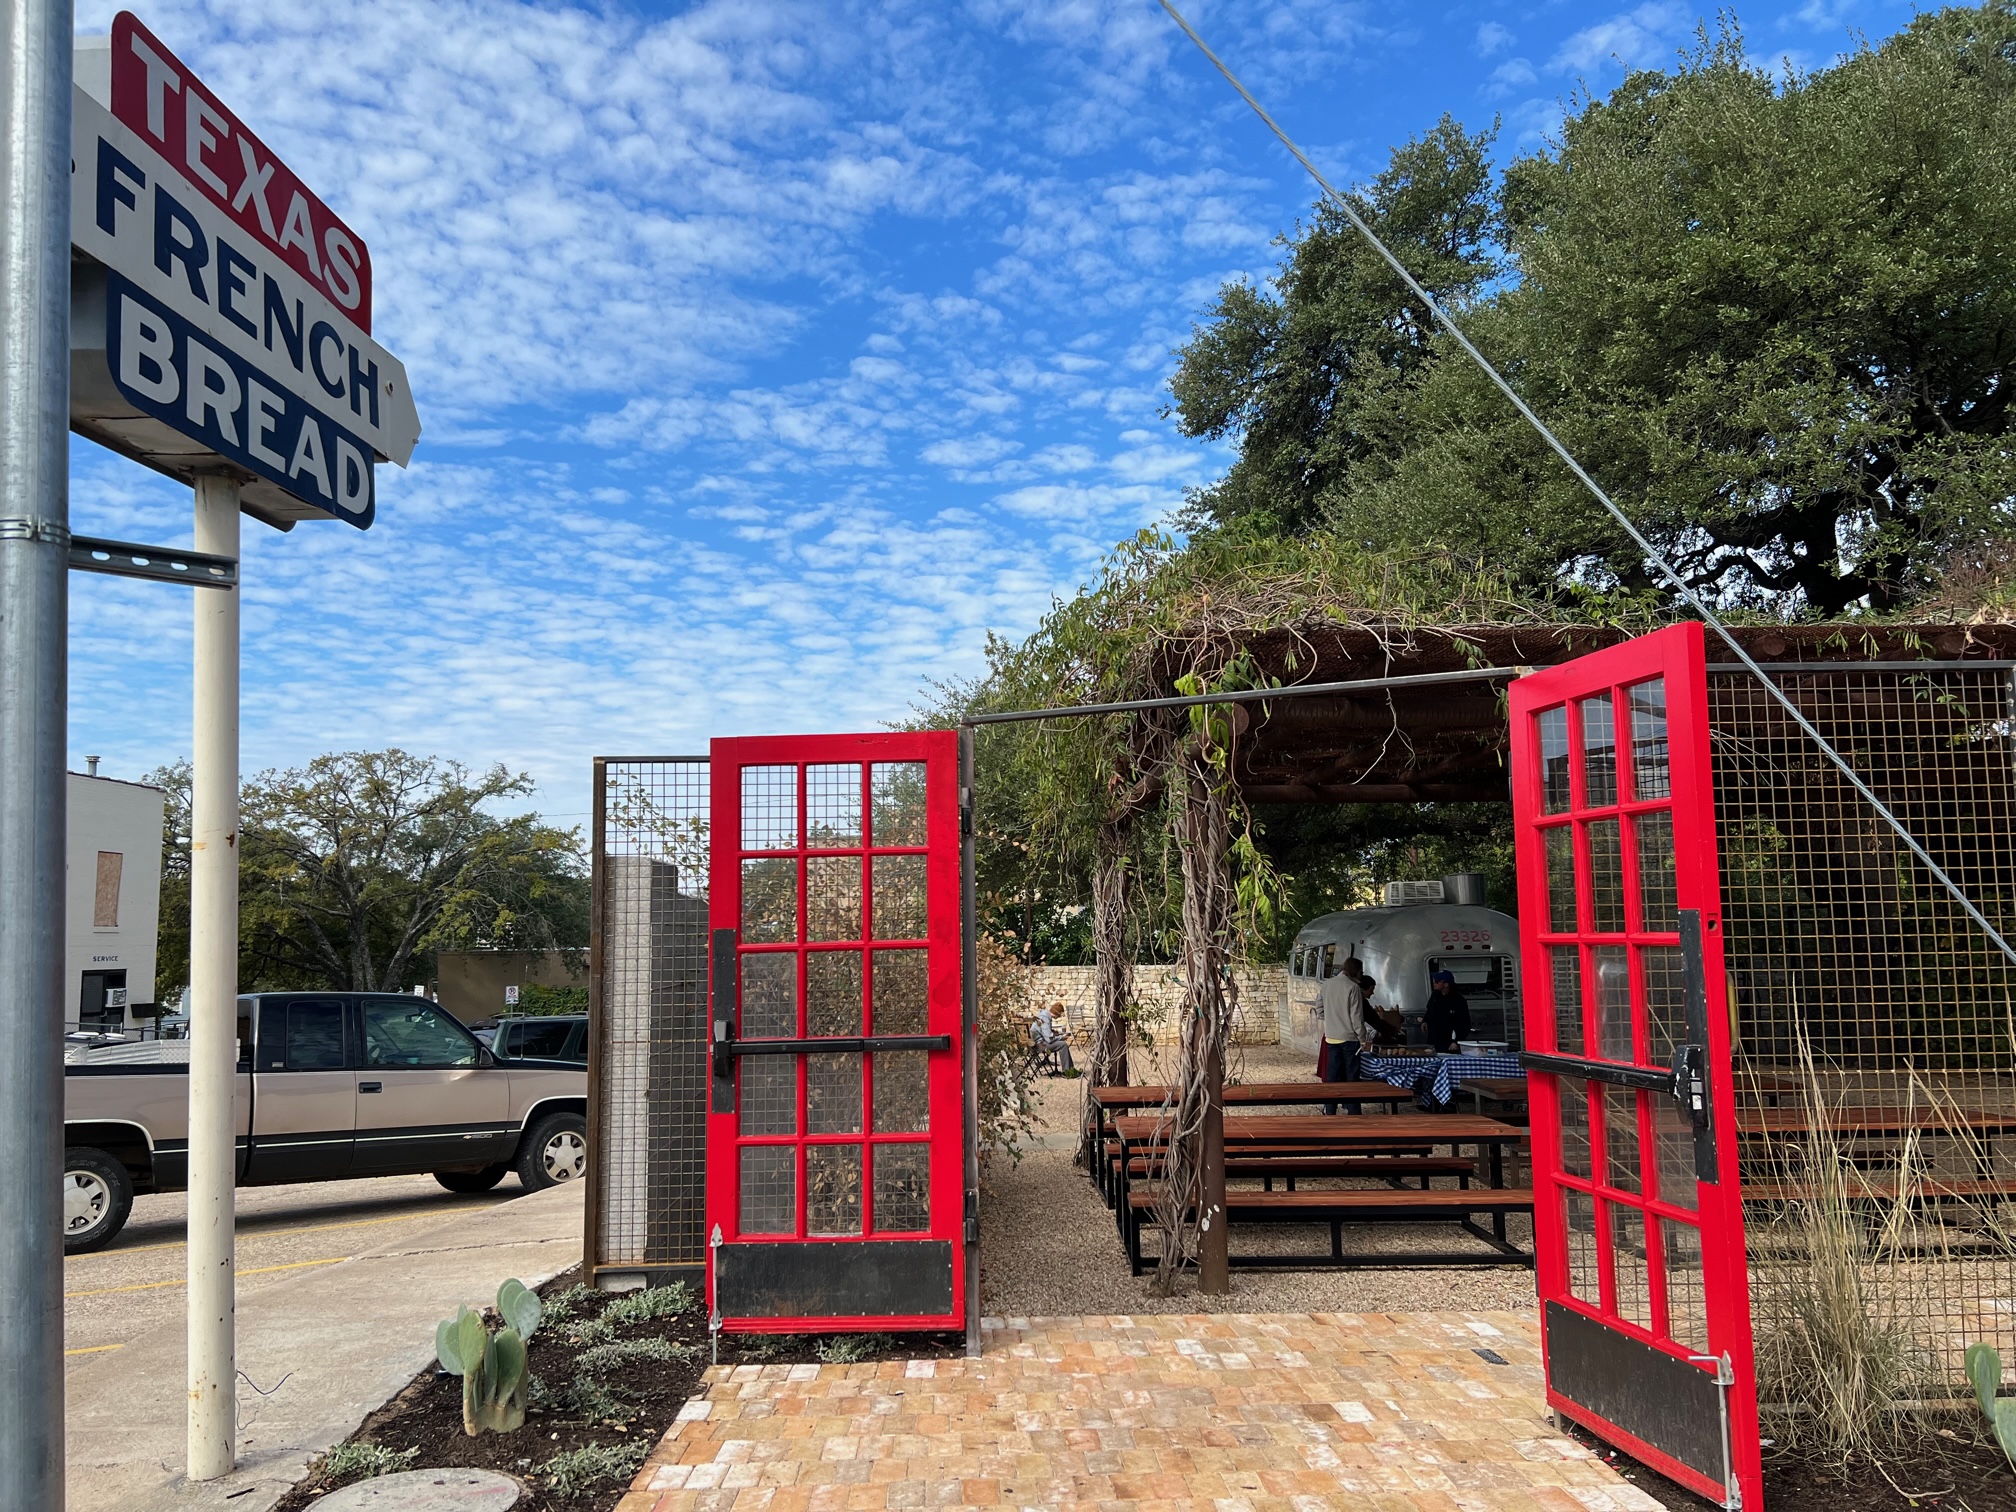 A patio with open red gate doors next to a sign that reads “Texas French Bread.”